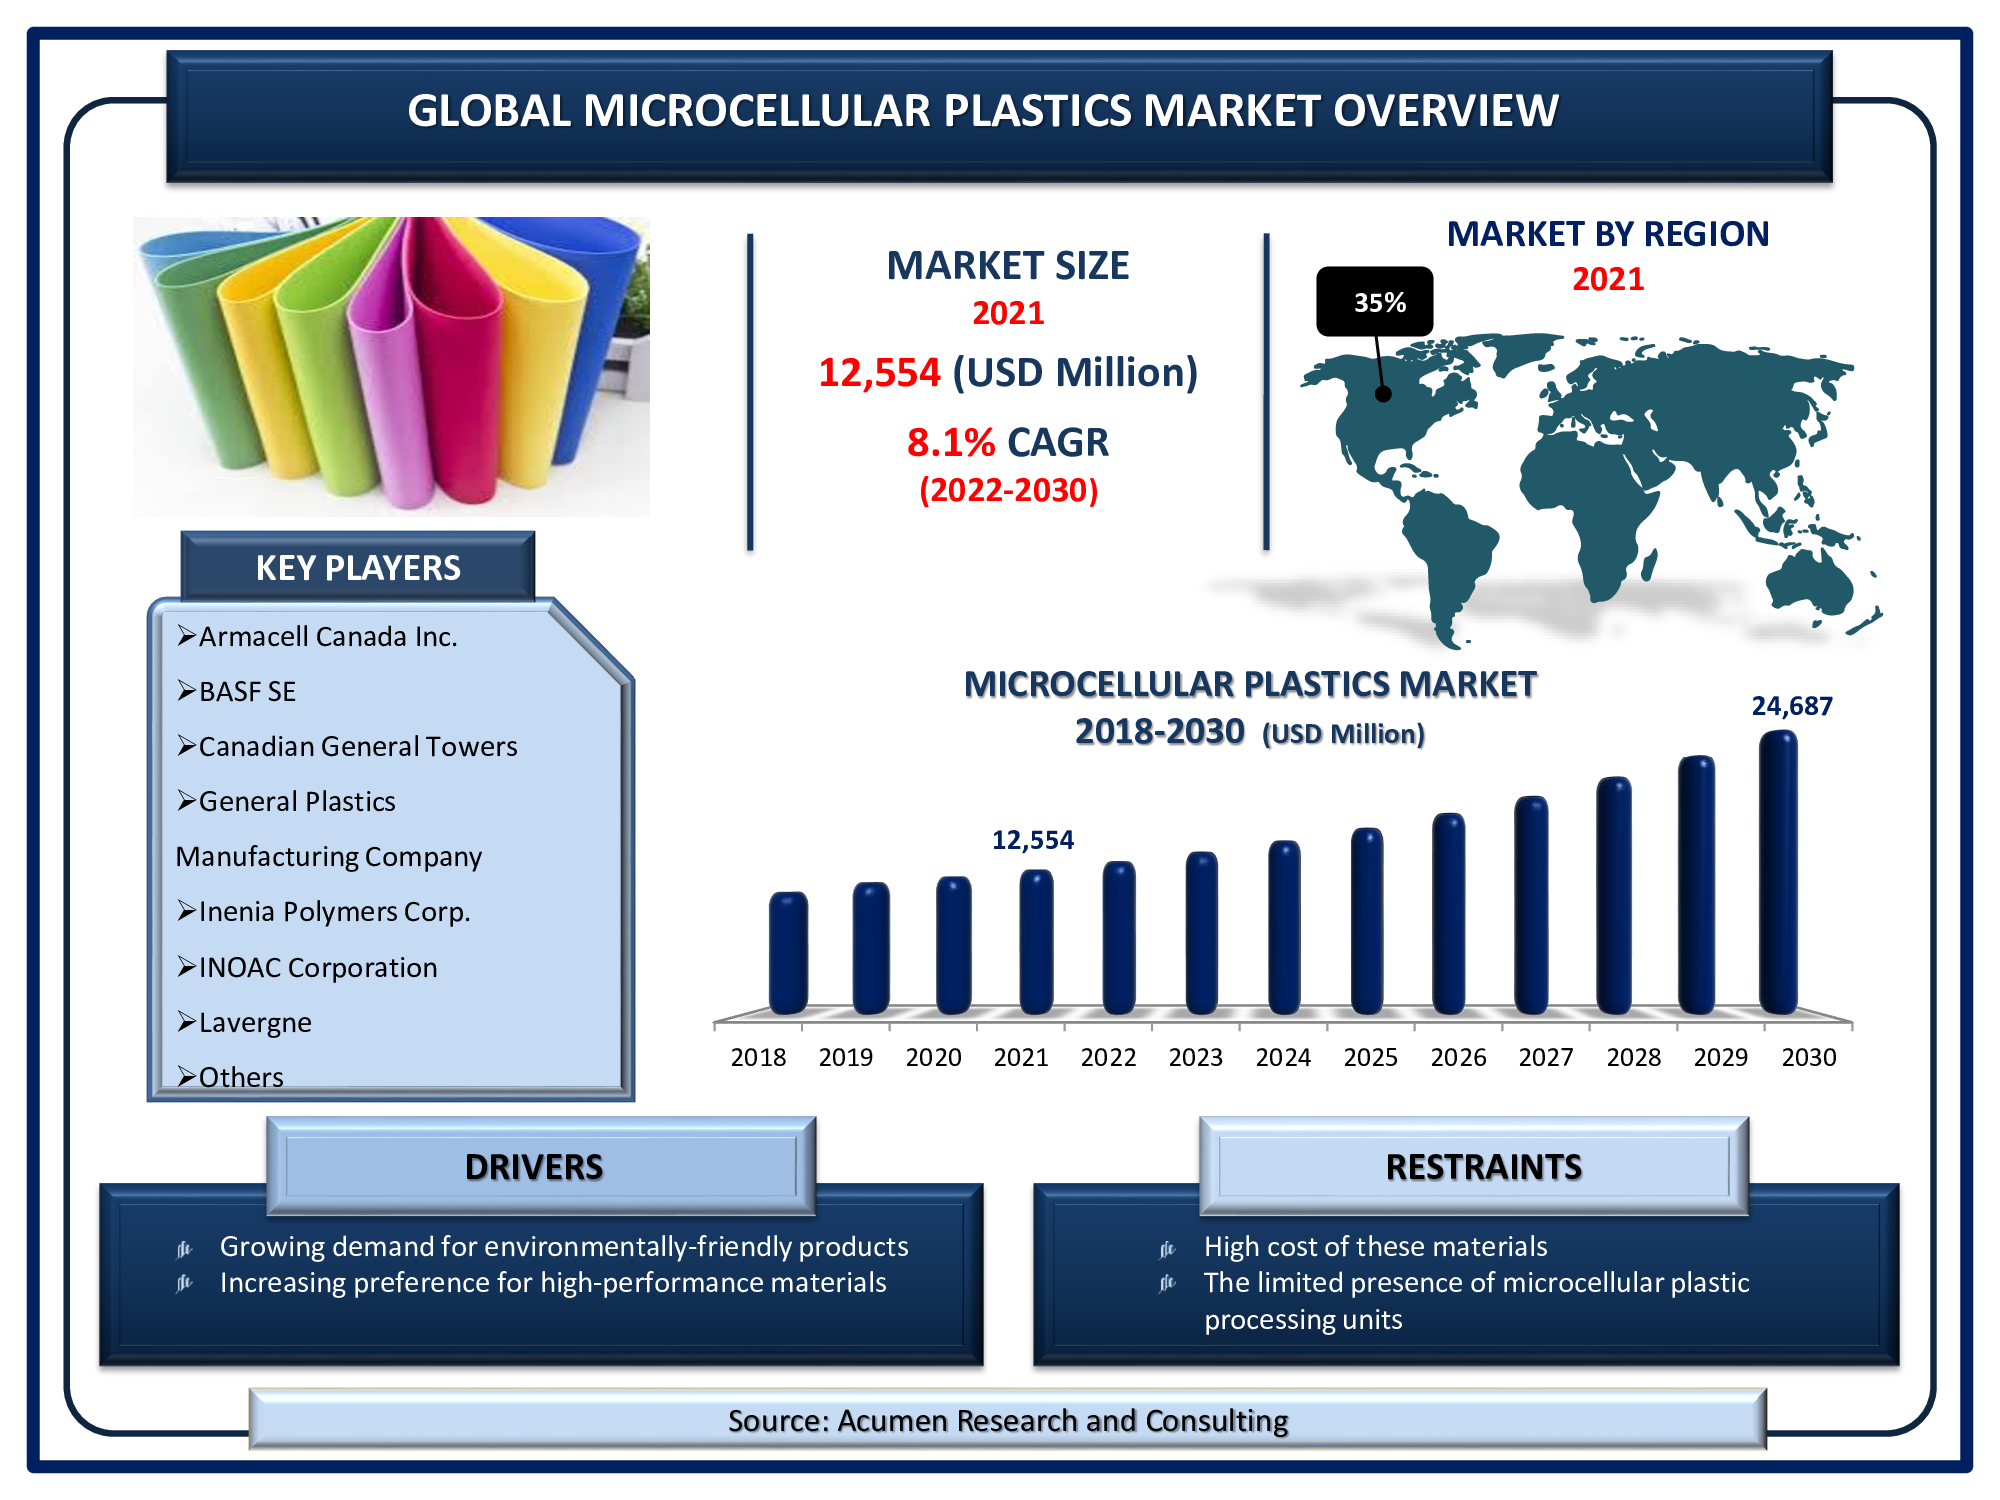 The Global Microcellular Plastics Market Size accounted for USD 12,554 Million in 2021 and is projected to reach USD 24,687 Million by 2030.